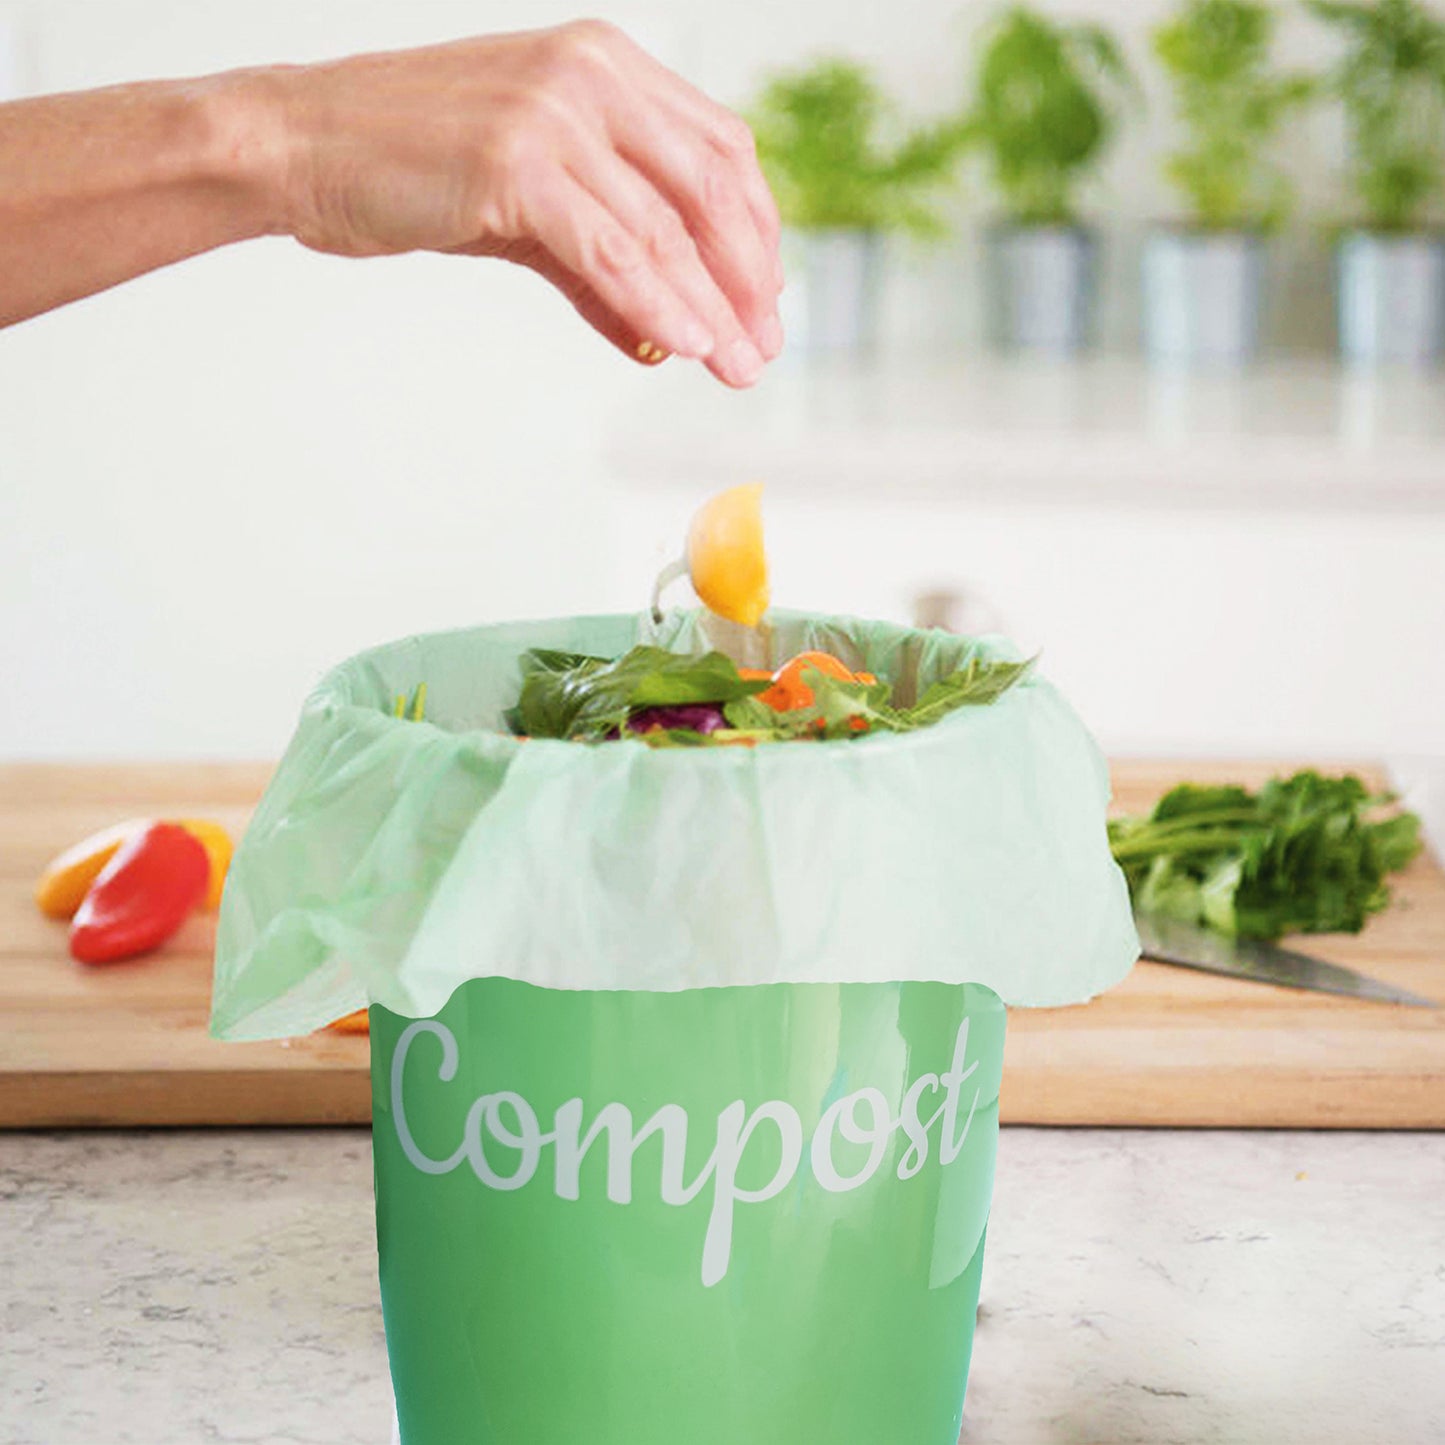 DIY Easy Kitchen Compost Bucket - One Hundred Dollars a Month